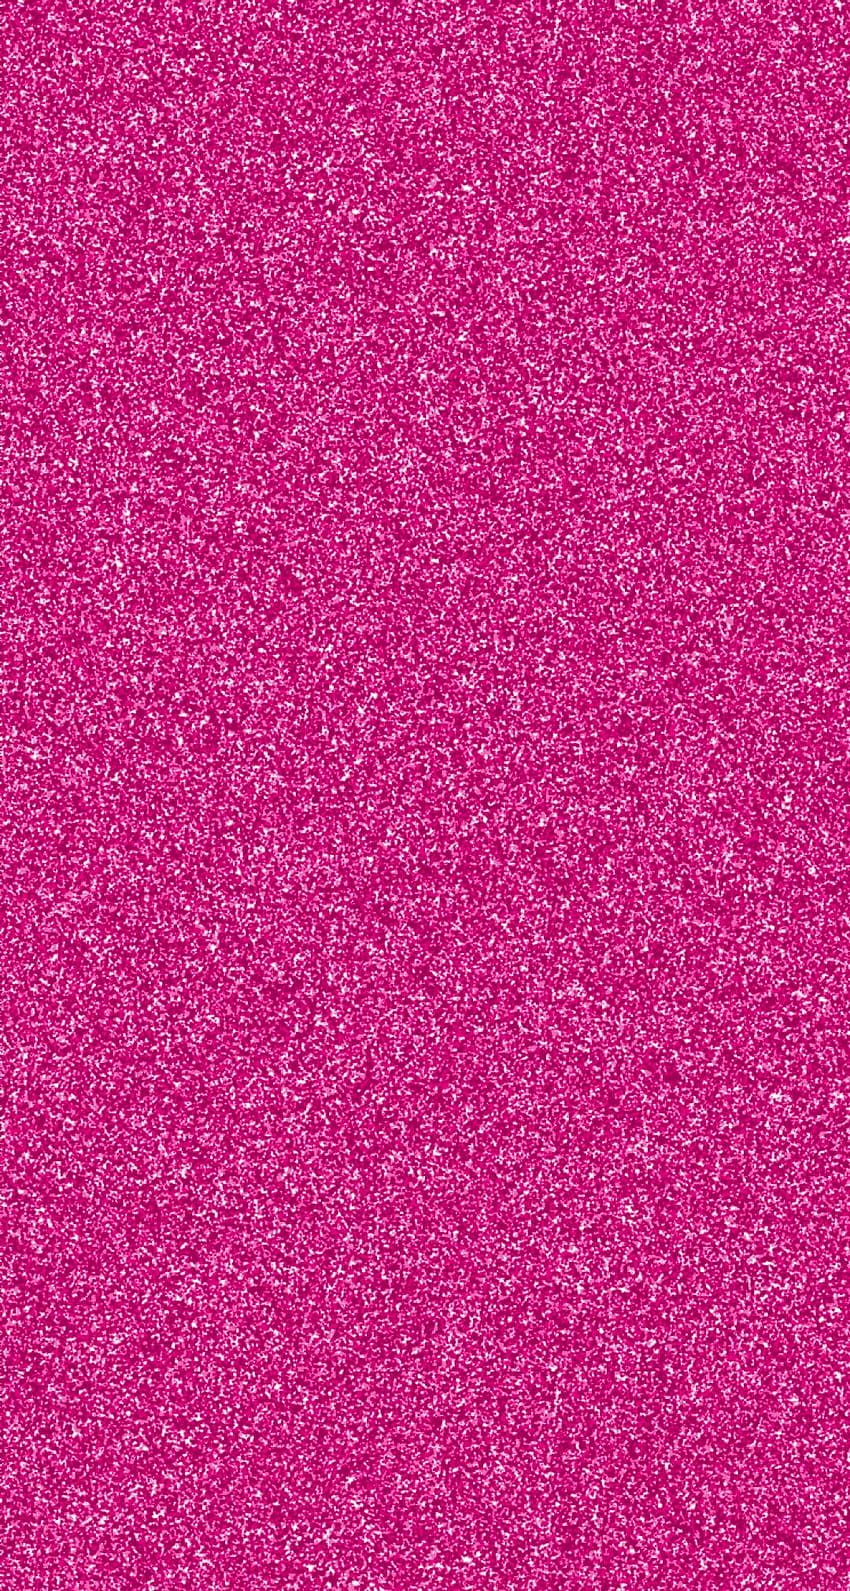 62 Hot Pink Glitter, Sparkle, Glow Phone, pink with sparkles HD phone wallpaper